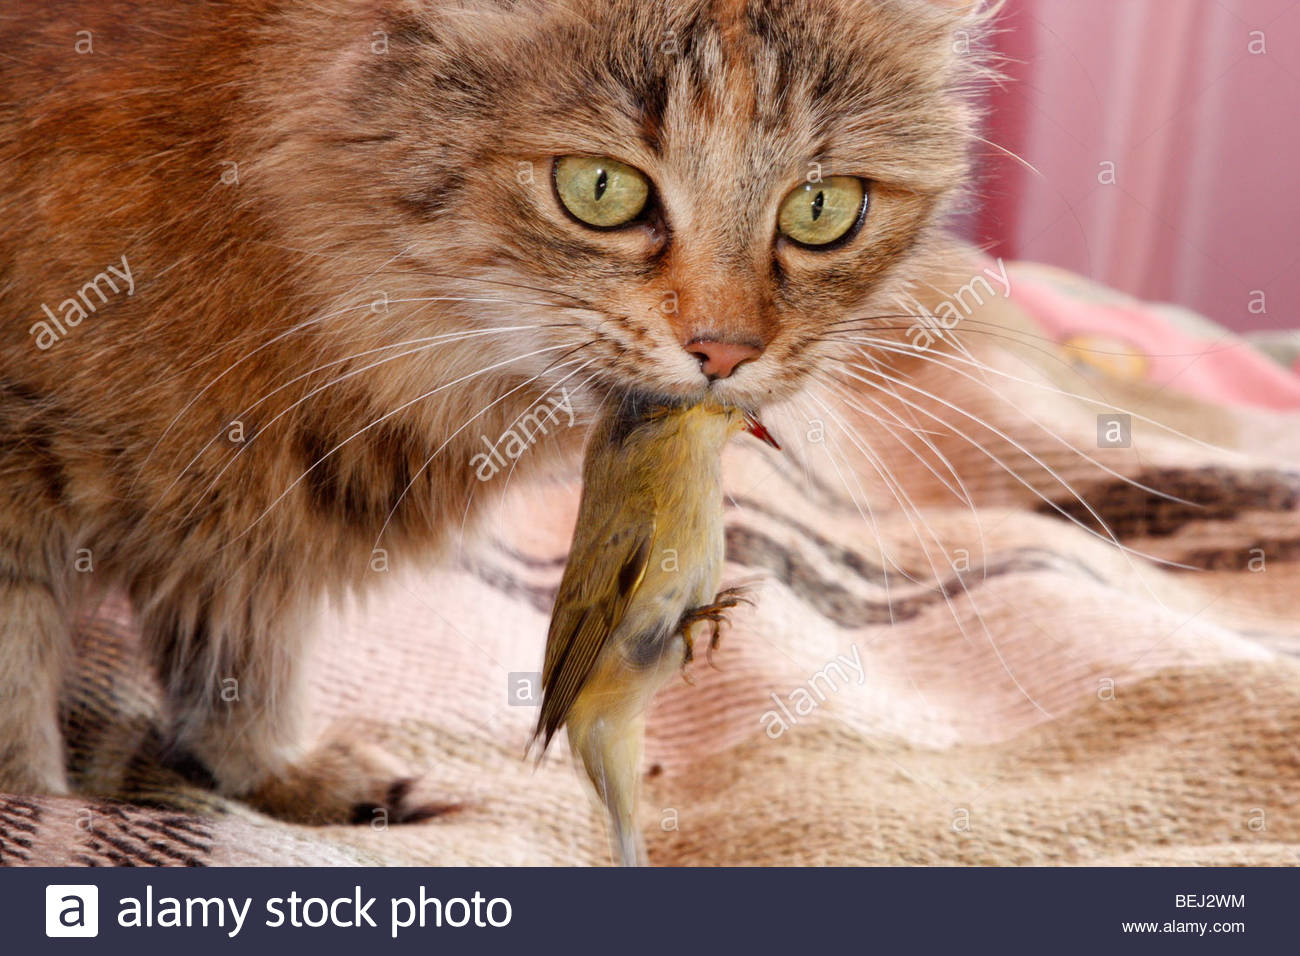 a-home-cat-is-caught-here-with-a-tiny-bill-bird-in-the-mouth-when-BEJ2WM.jpg